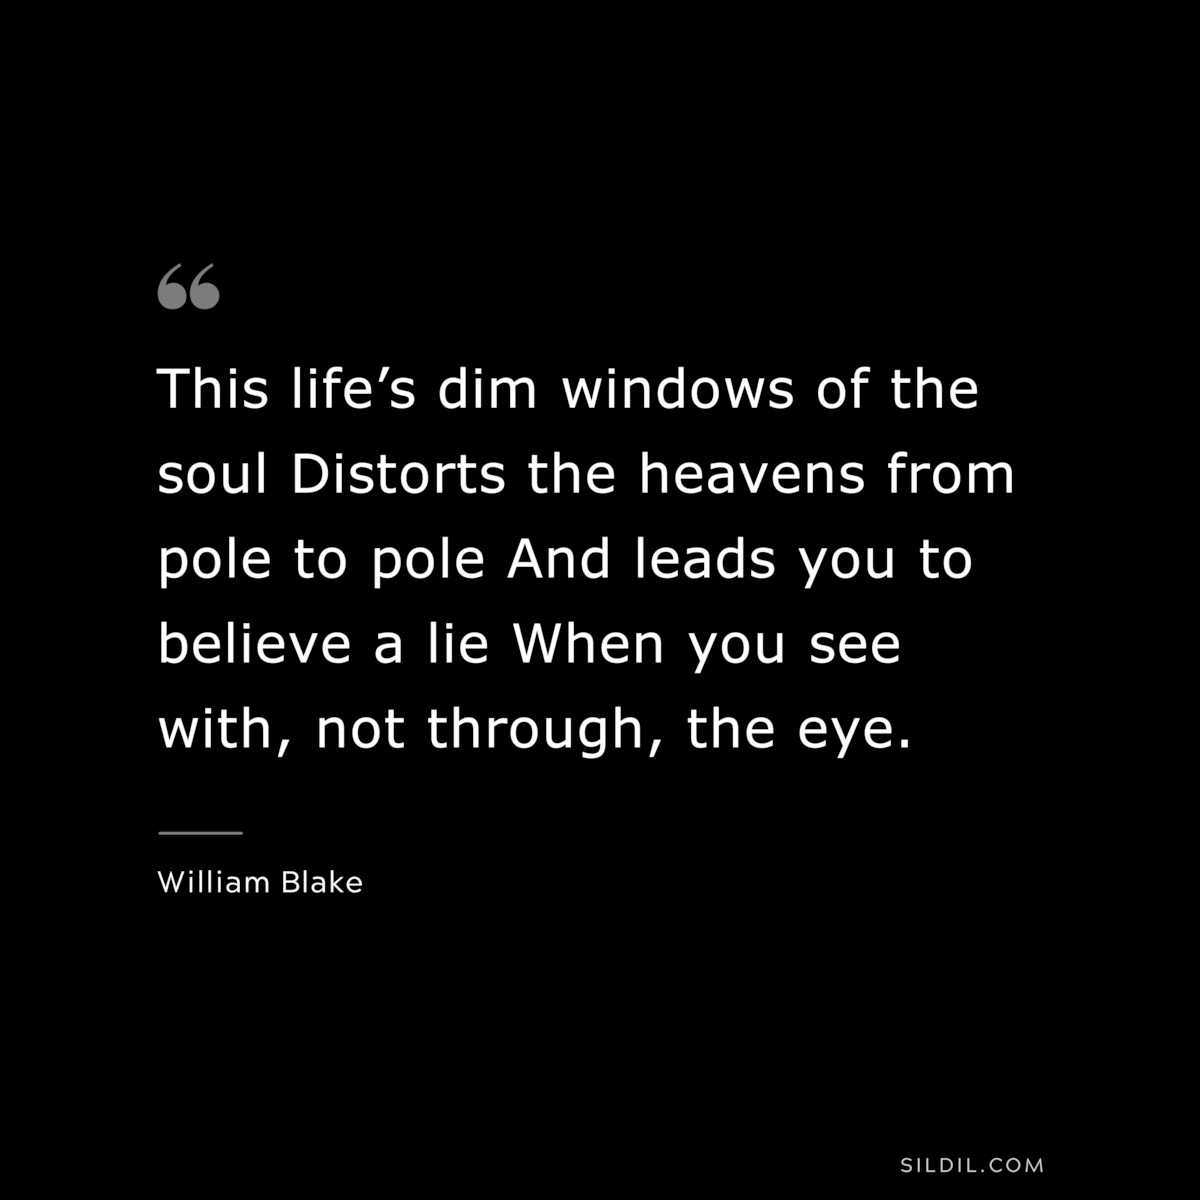 This life’s dim windows of the soul Distorts the heavens from pole to pole And leads you to believe a lie When you see with, not through, the eye. ― William Blake